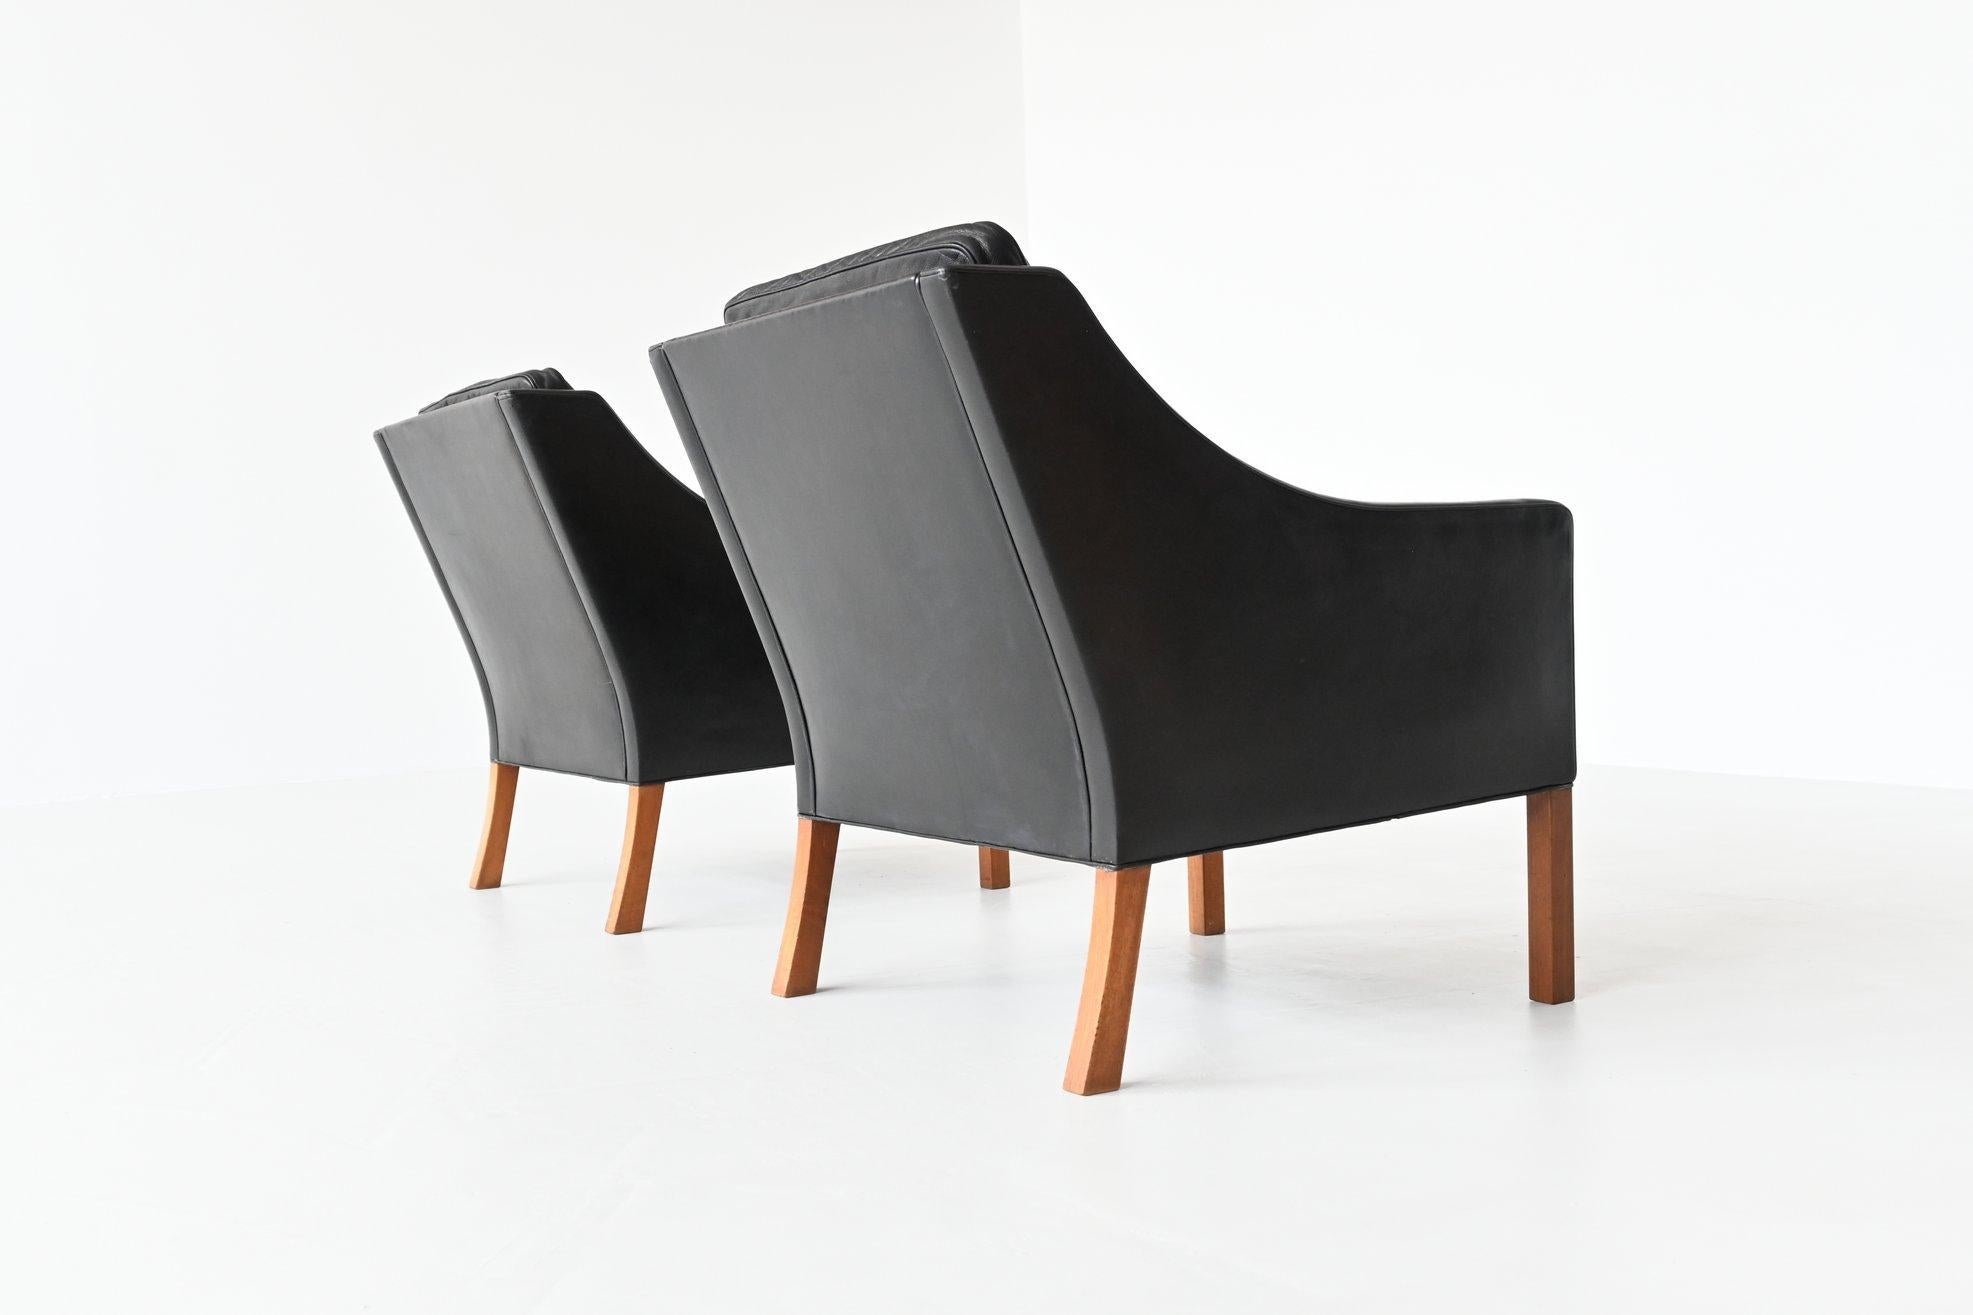 Beautiful piair of lounge chairs model 2207 designed by Børge Mogensen for Fredericia Stolefabrik, Denmark 1963. These chairs have high quality black leather upholstery and solid teak legs. This set is quintessentially Danish; comfortable, well made